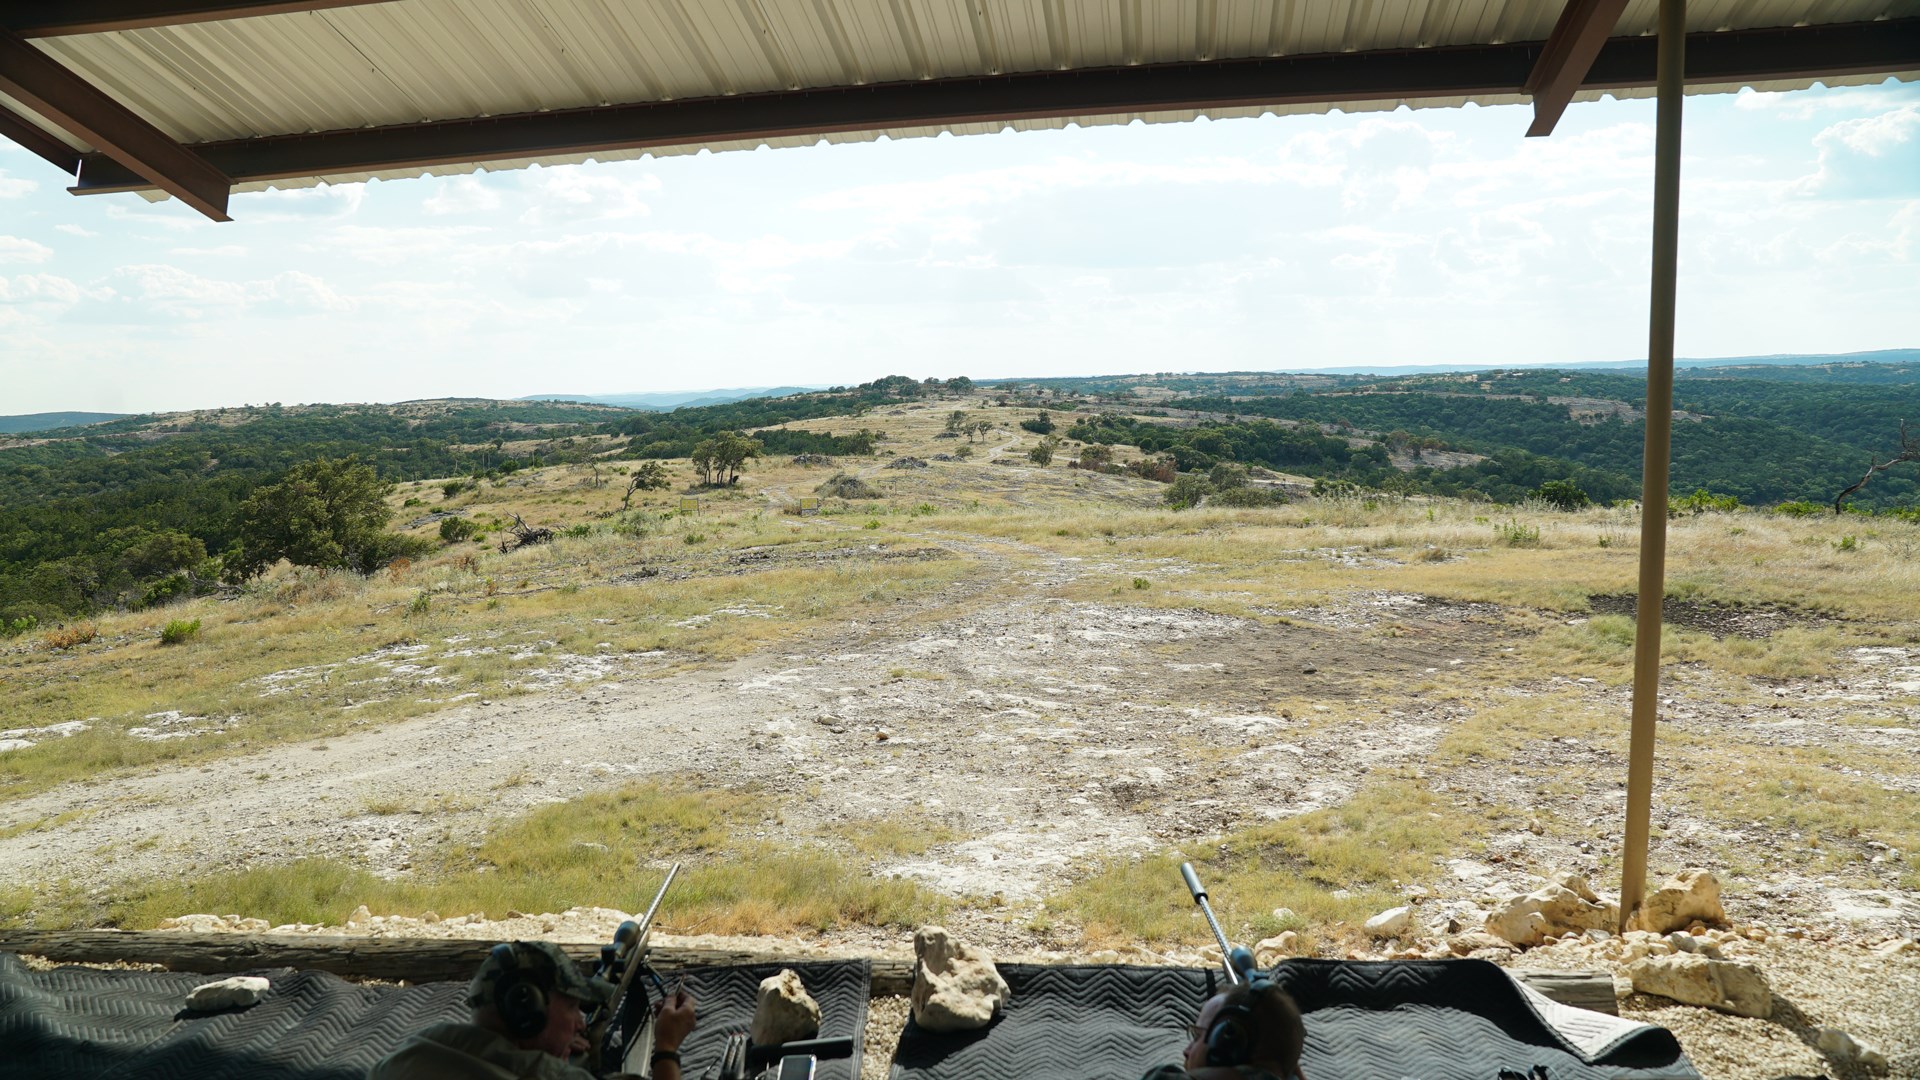 A view downrange on one of many ranges at FTW…there are steel plates down there to at least 1000 yards, maybe much farther…but it takes some serious looking to find them!